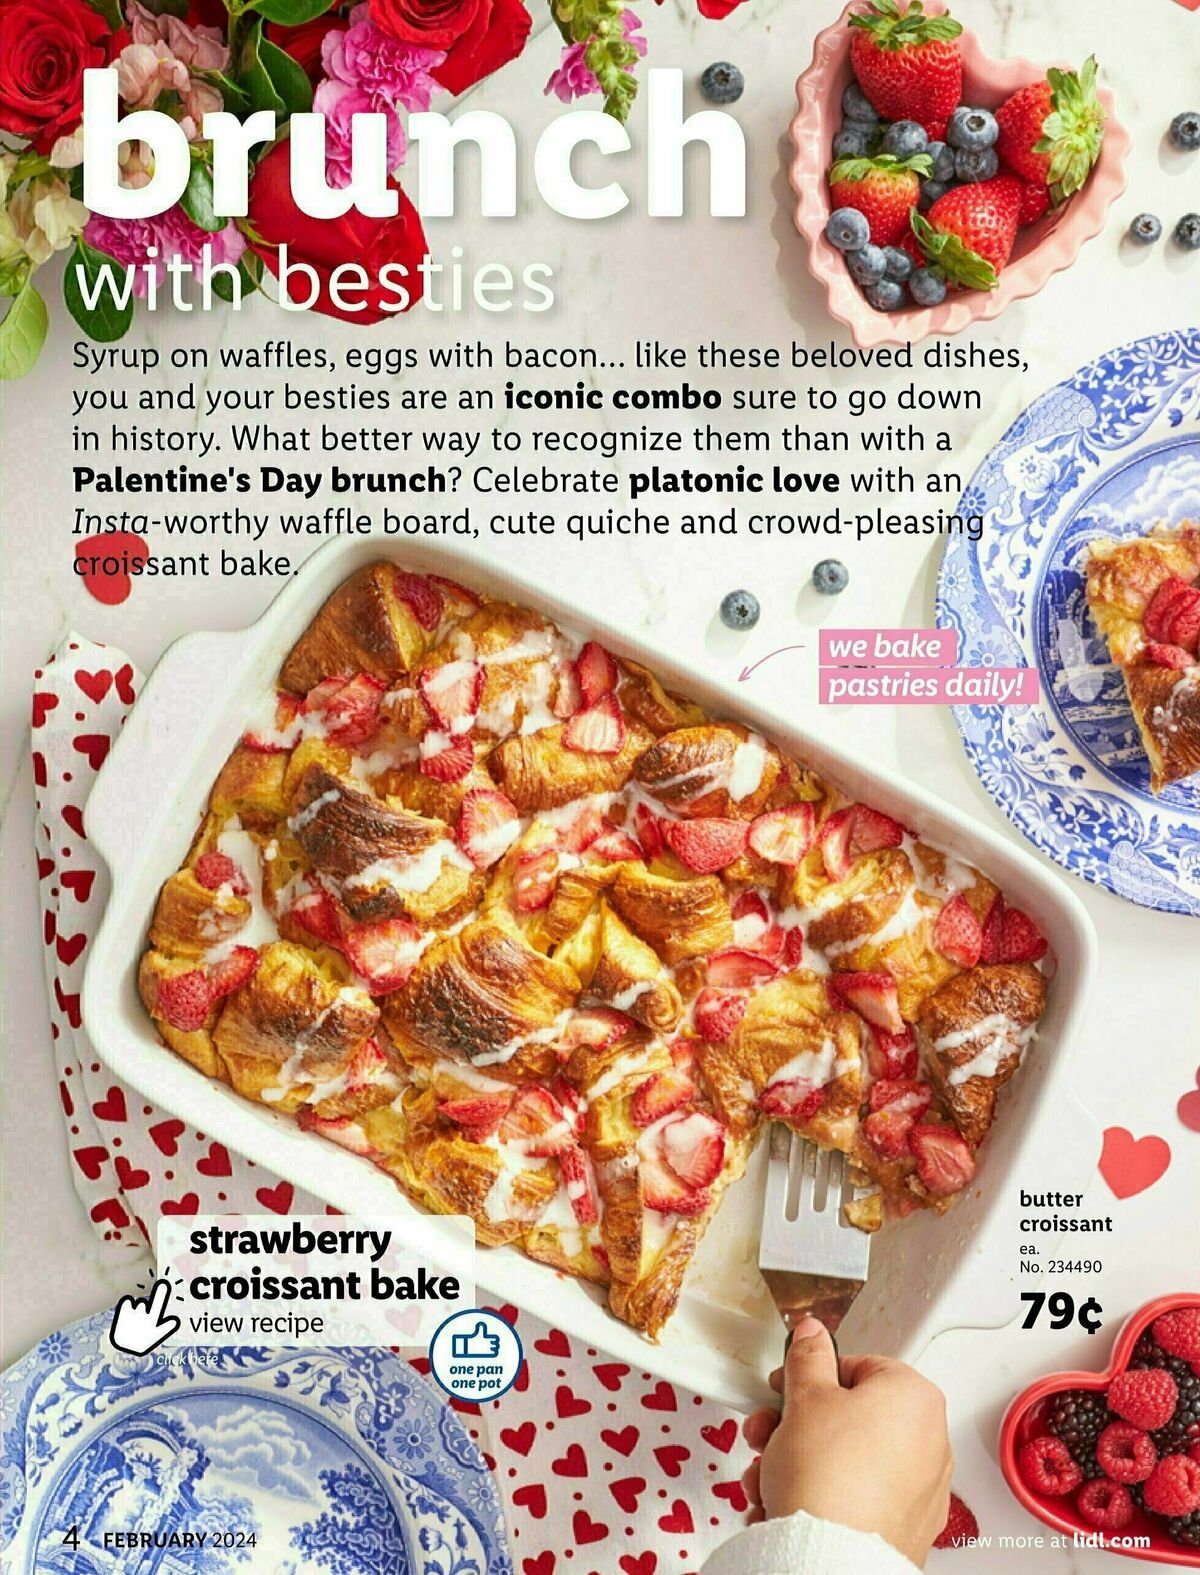 LIDL Catalog February Weekly Ad from January 24